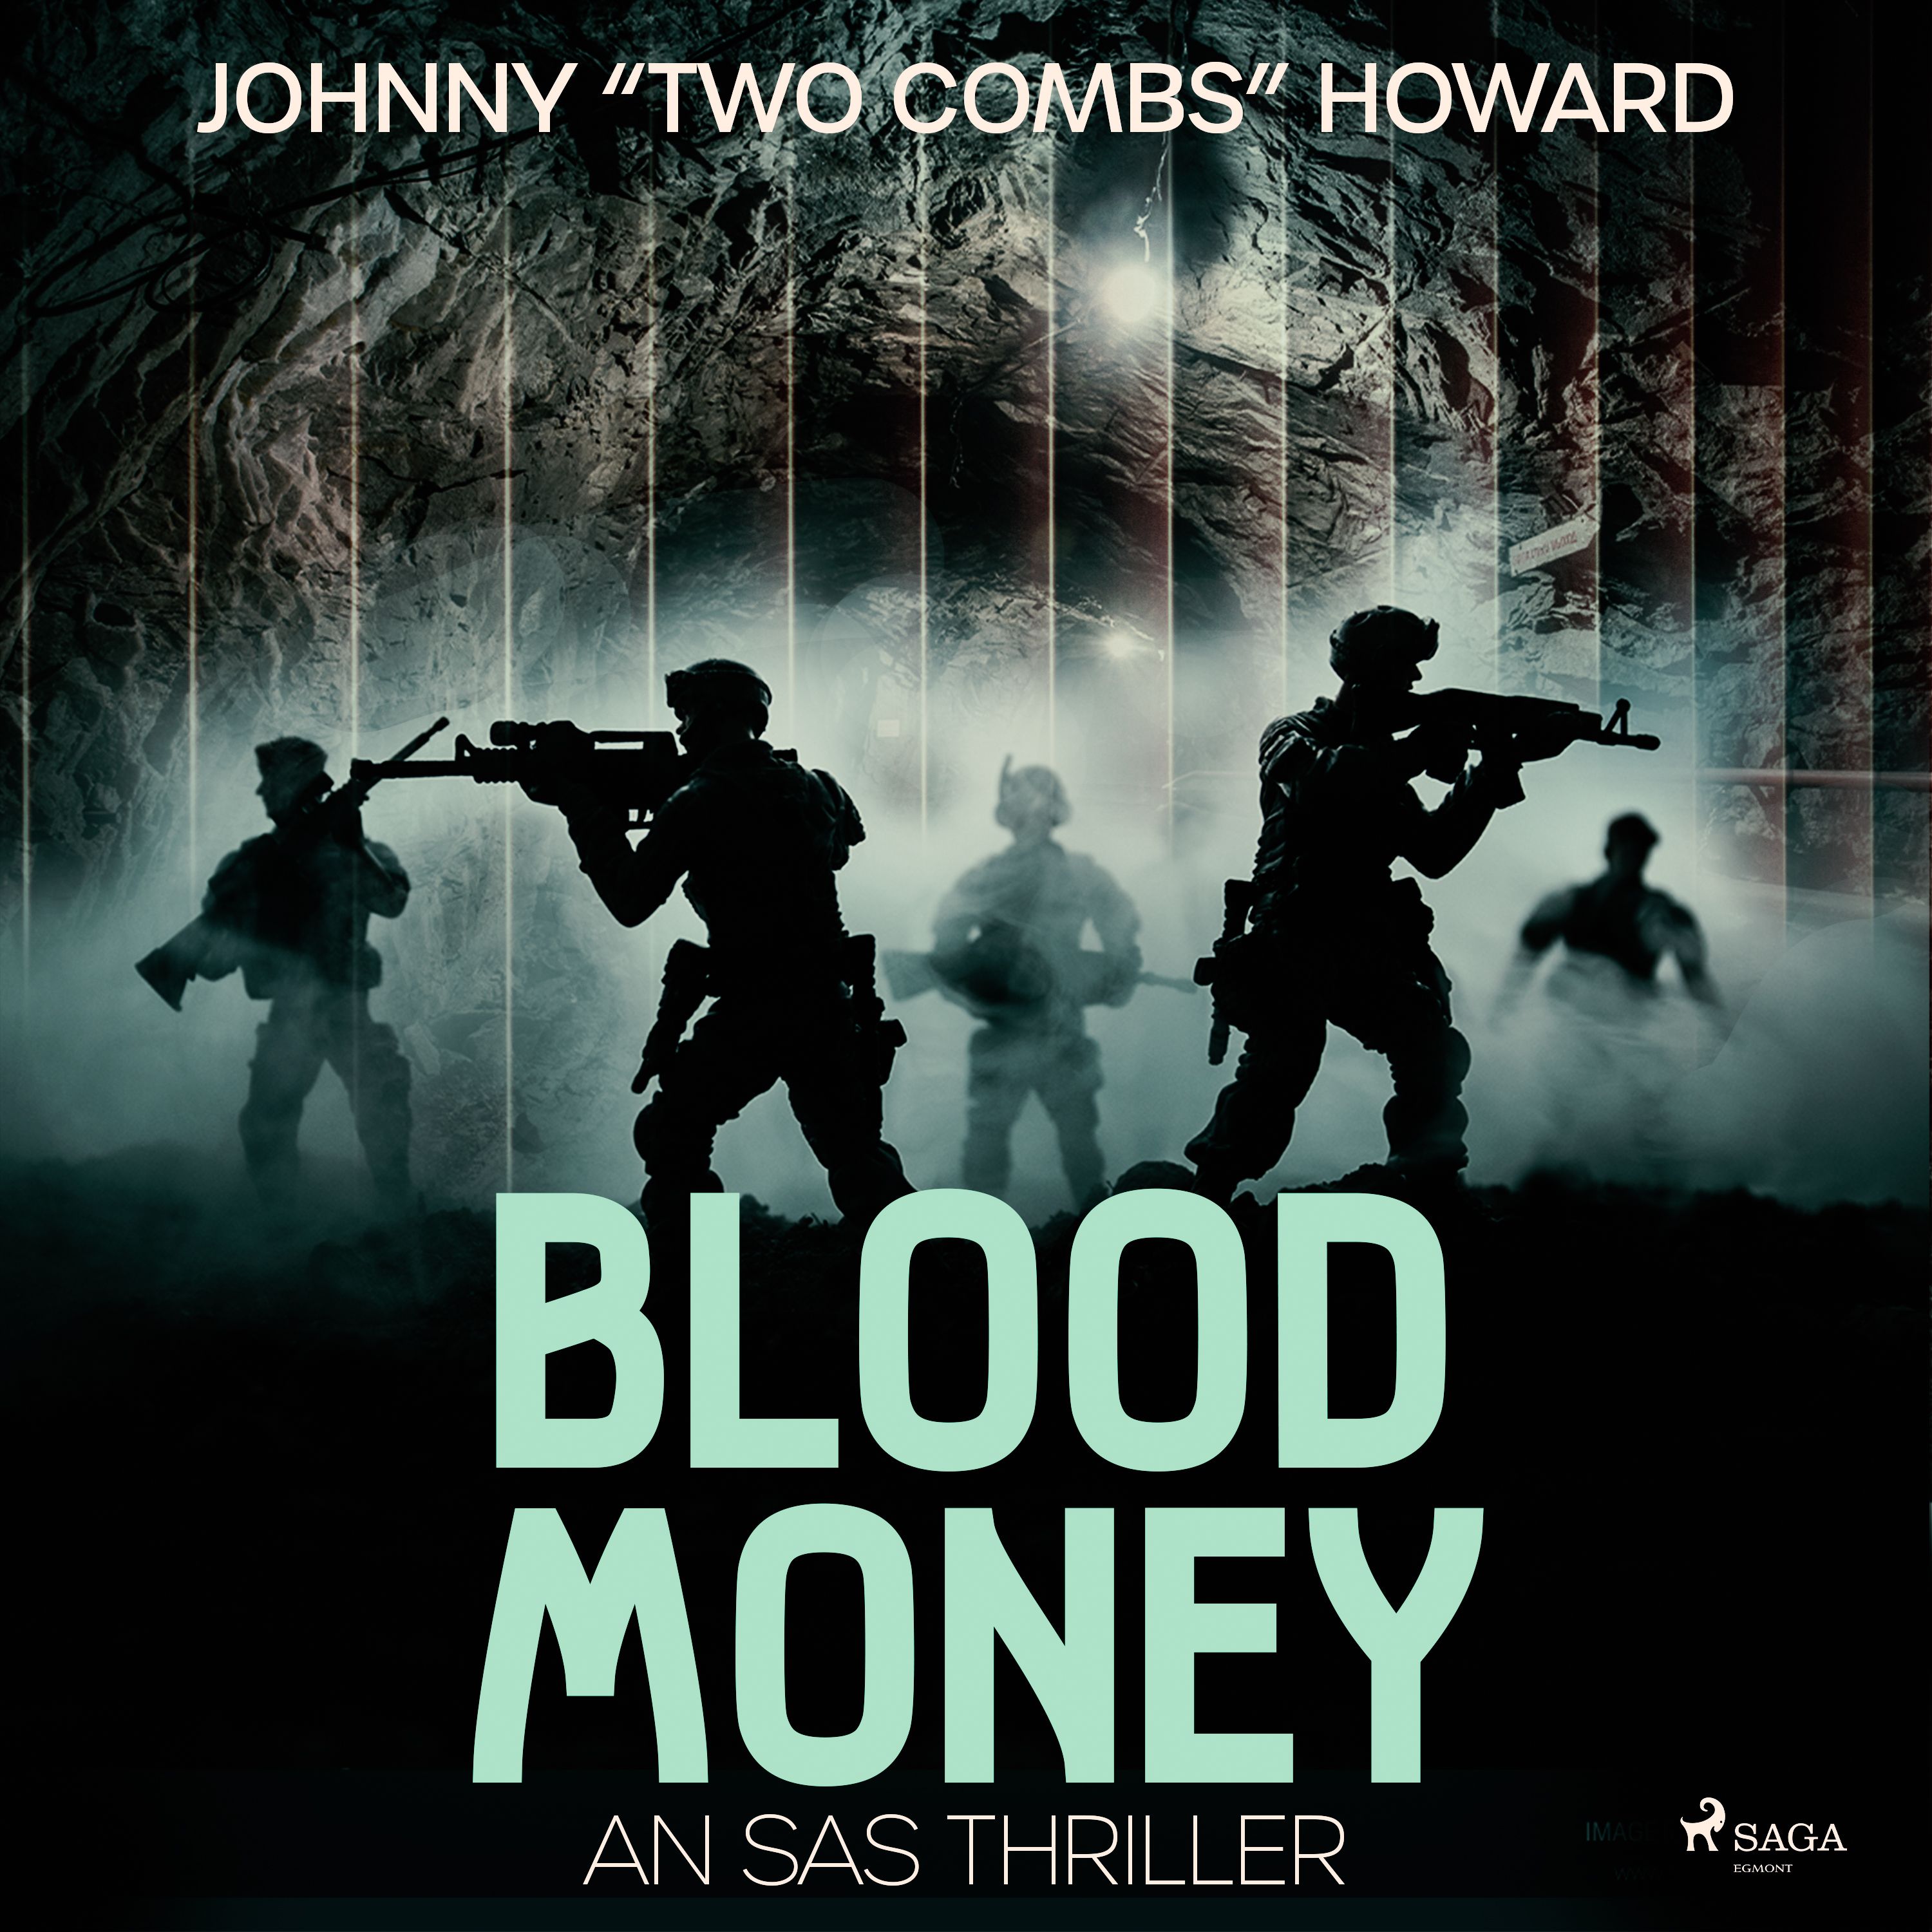 Blood Money: An SAS Thriller, audiobook by Johnny Two Combs Howard